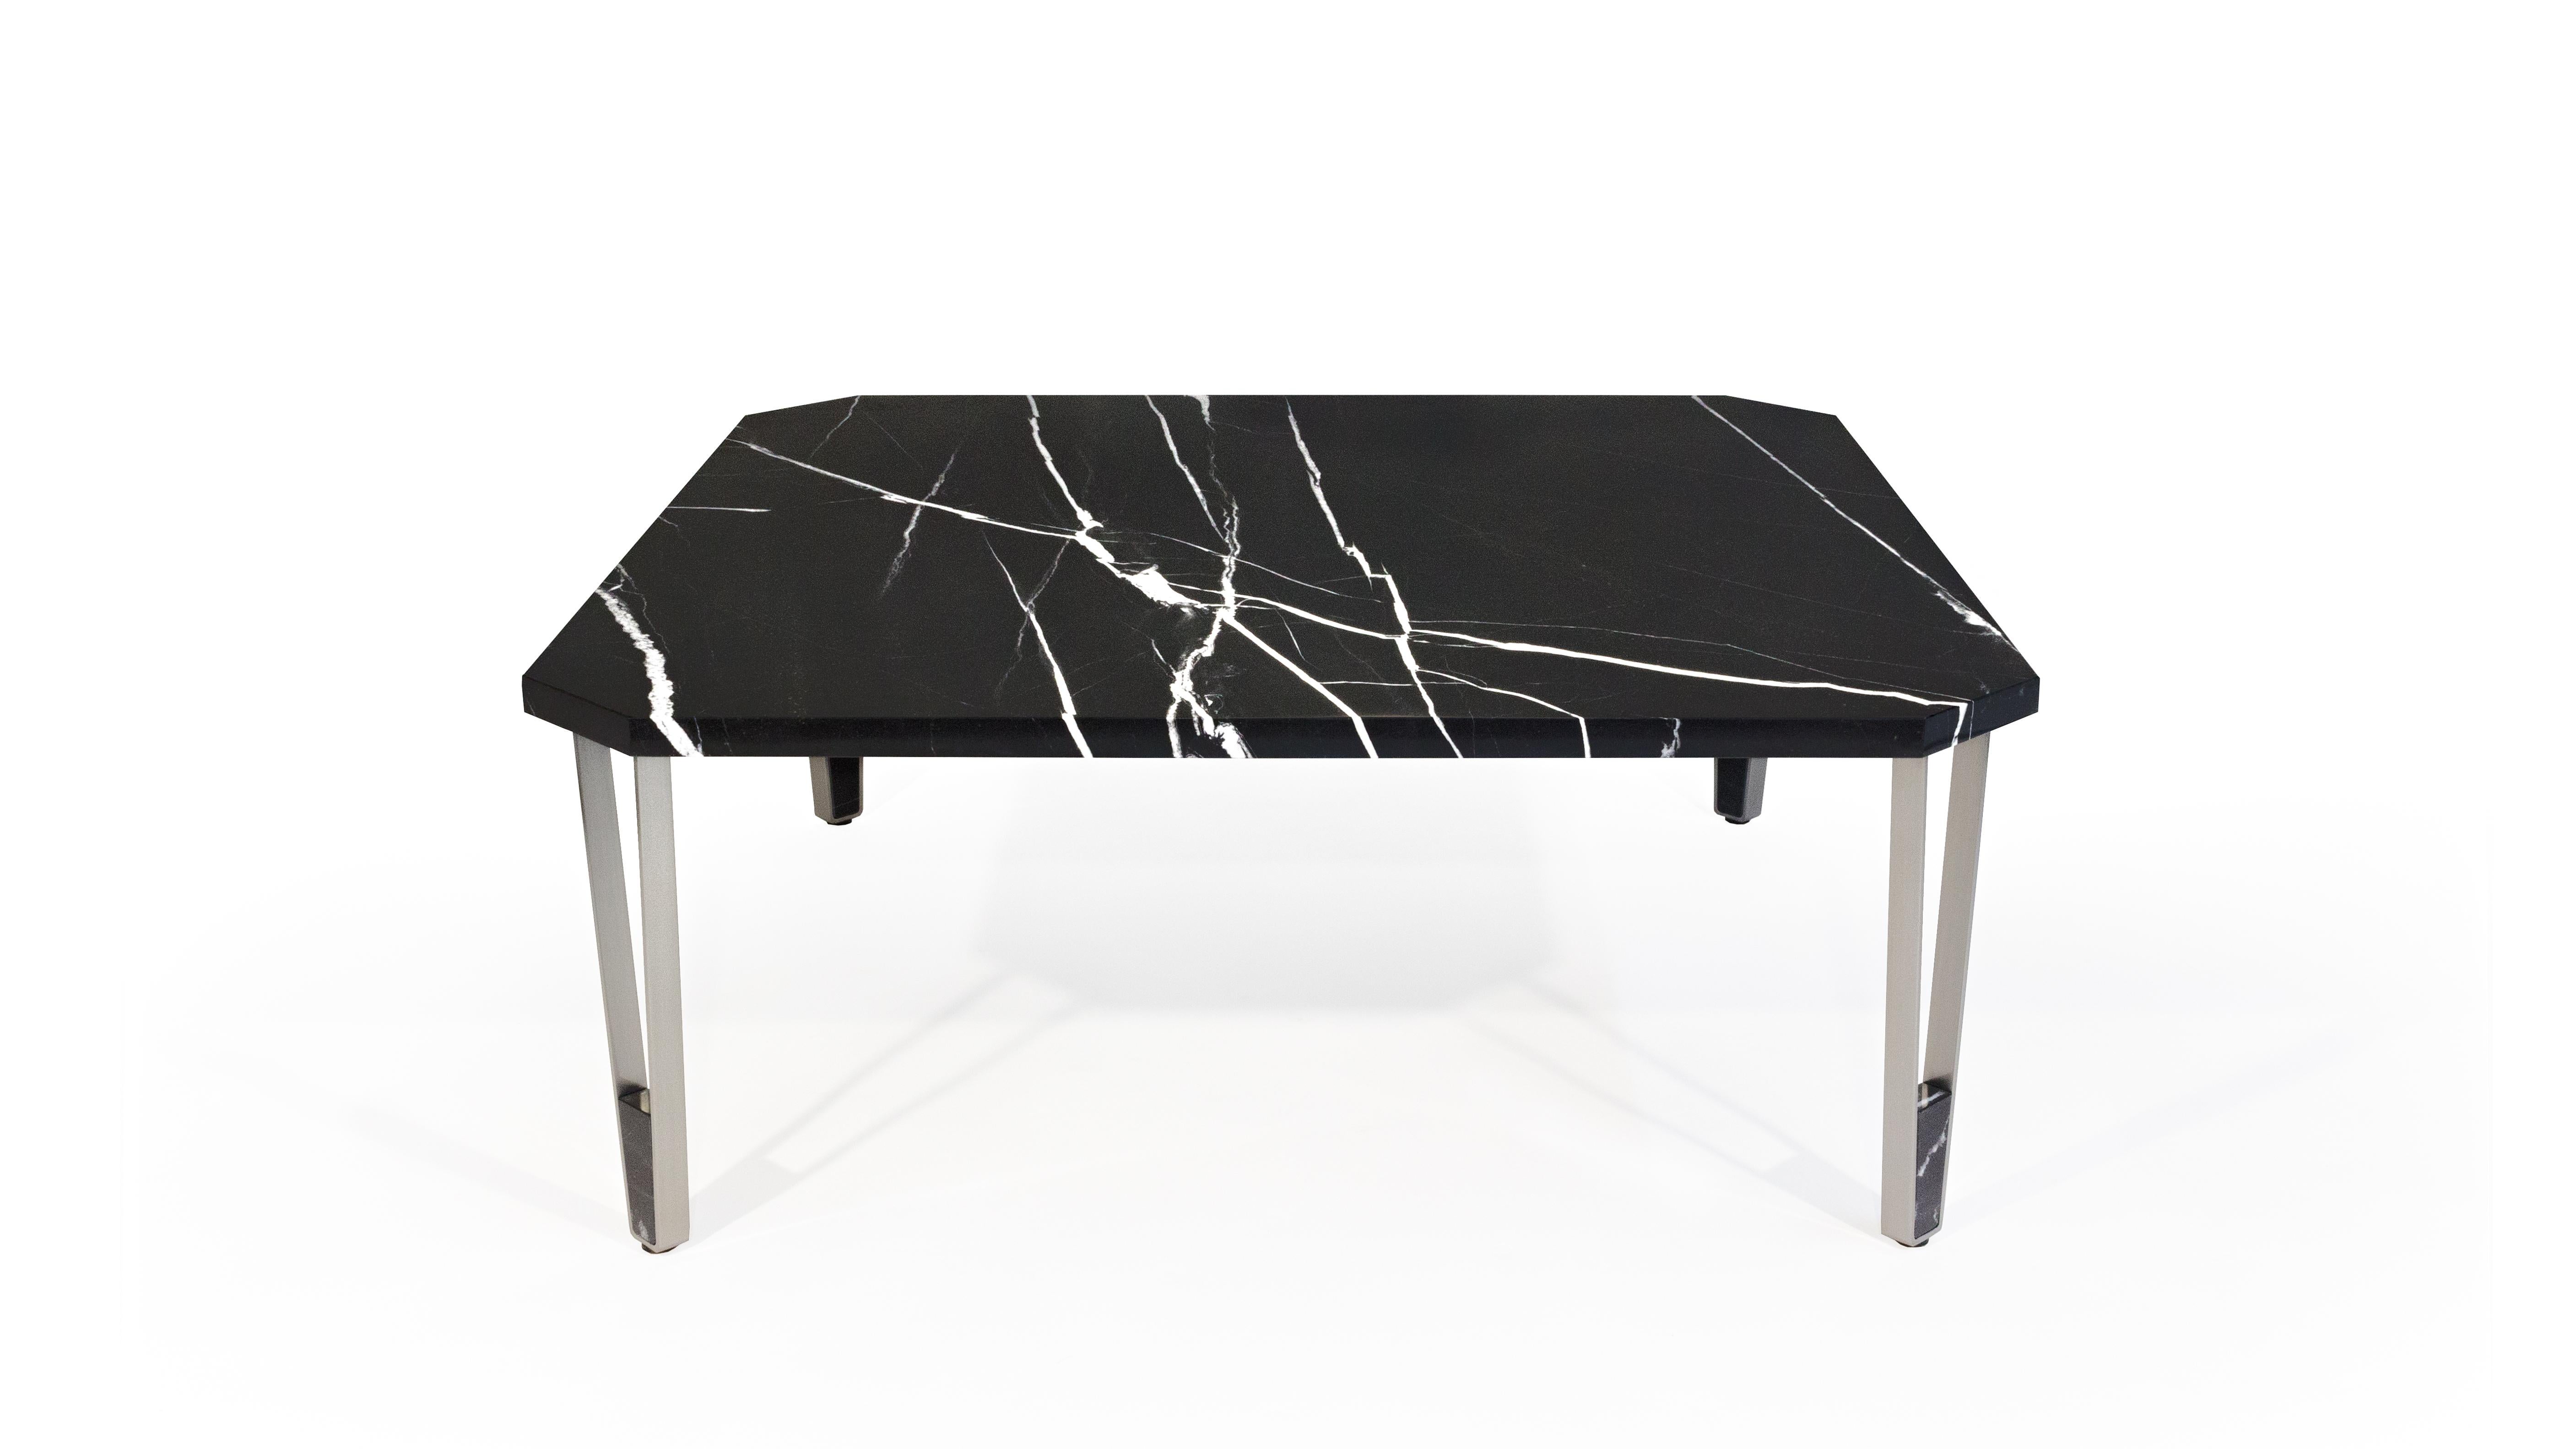 Ionic Square Nero Marquina Marble Coffee Table by InsidherLand
Dimensions: D 100 x H 40 cm.
Materials: Nero Marquina marble, brushed stainless steel.
85 kg.
Other materials available.

Ionic is one of the three orders of classical architecture